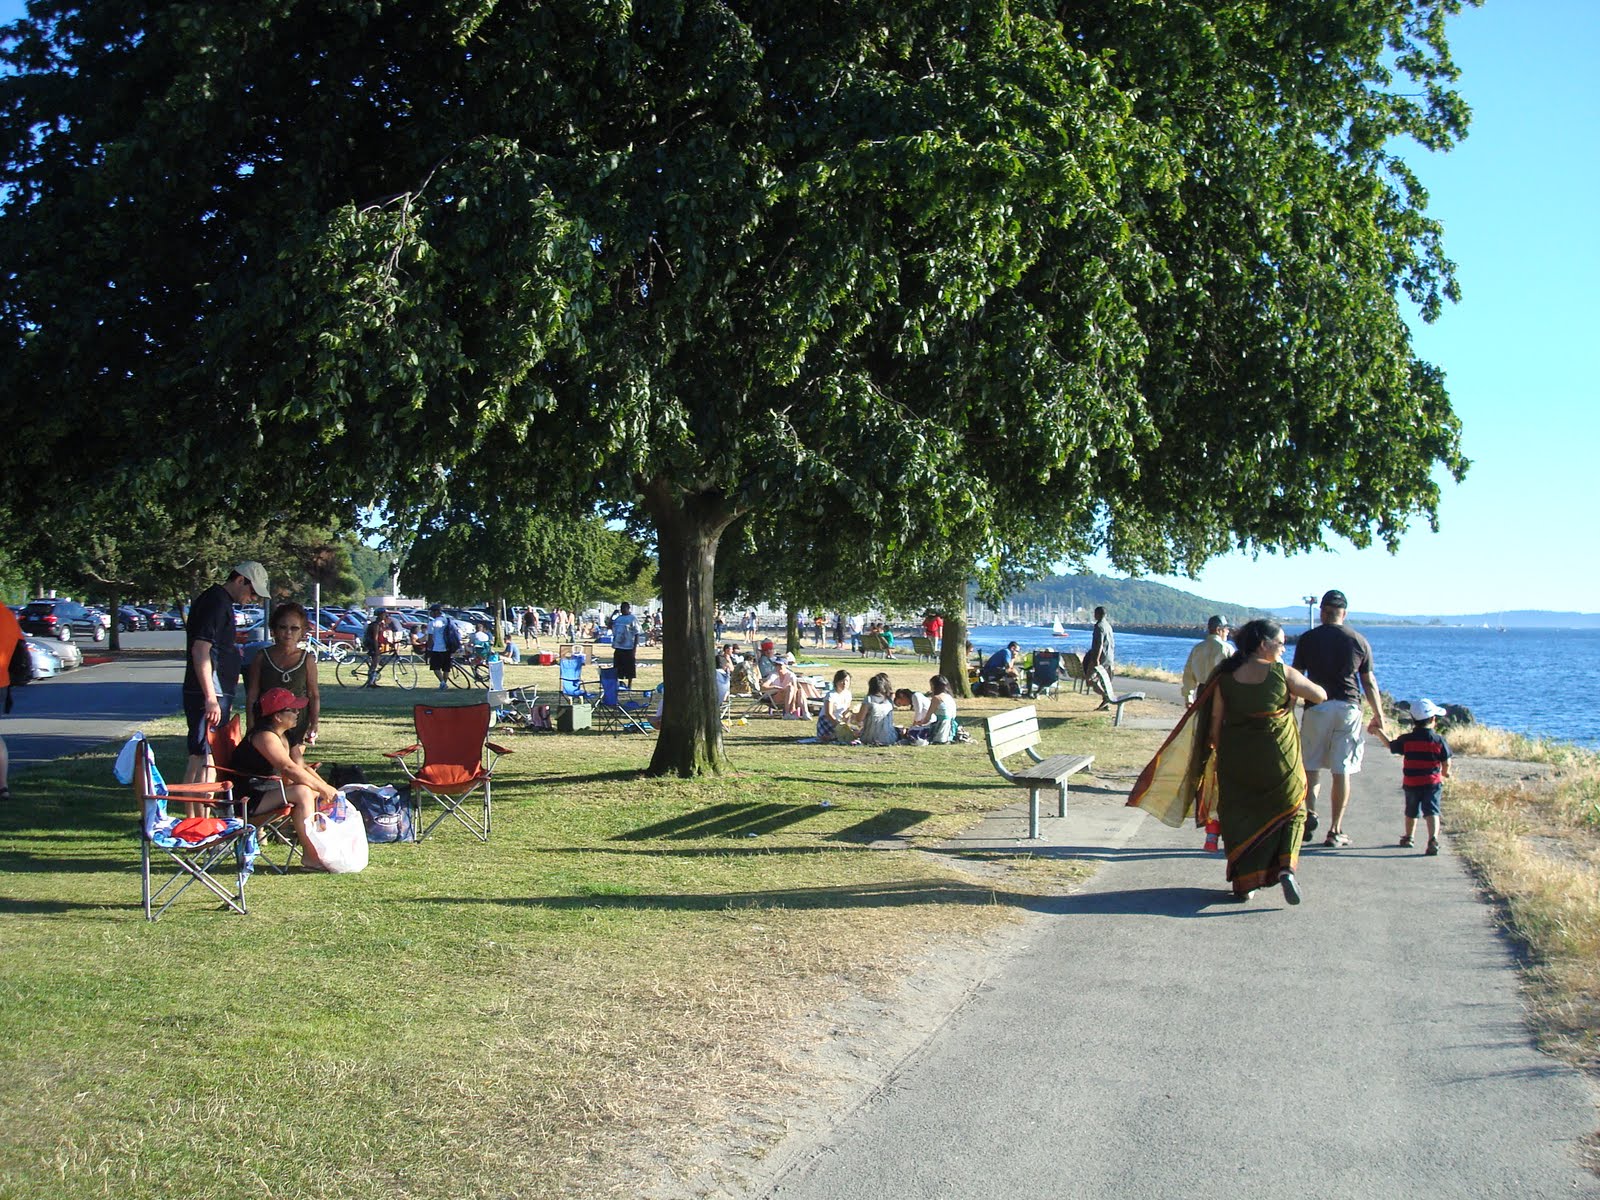 Things to do in Seattle: Golden Gardens Park - Free